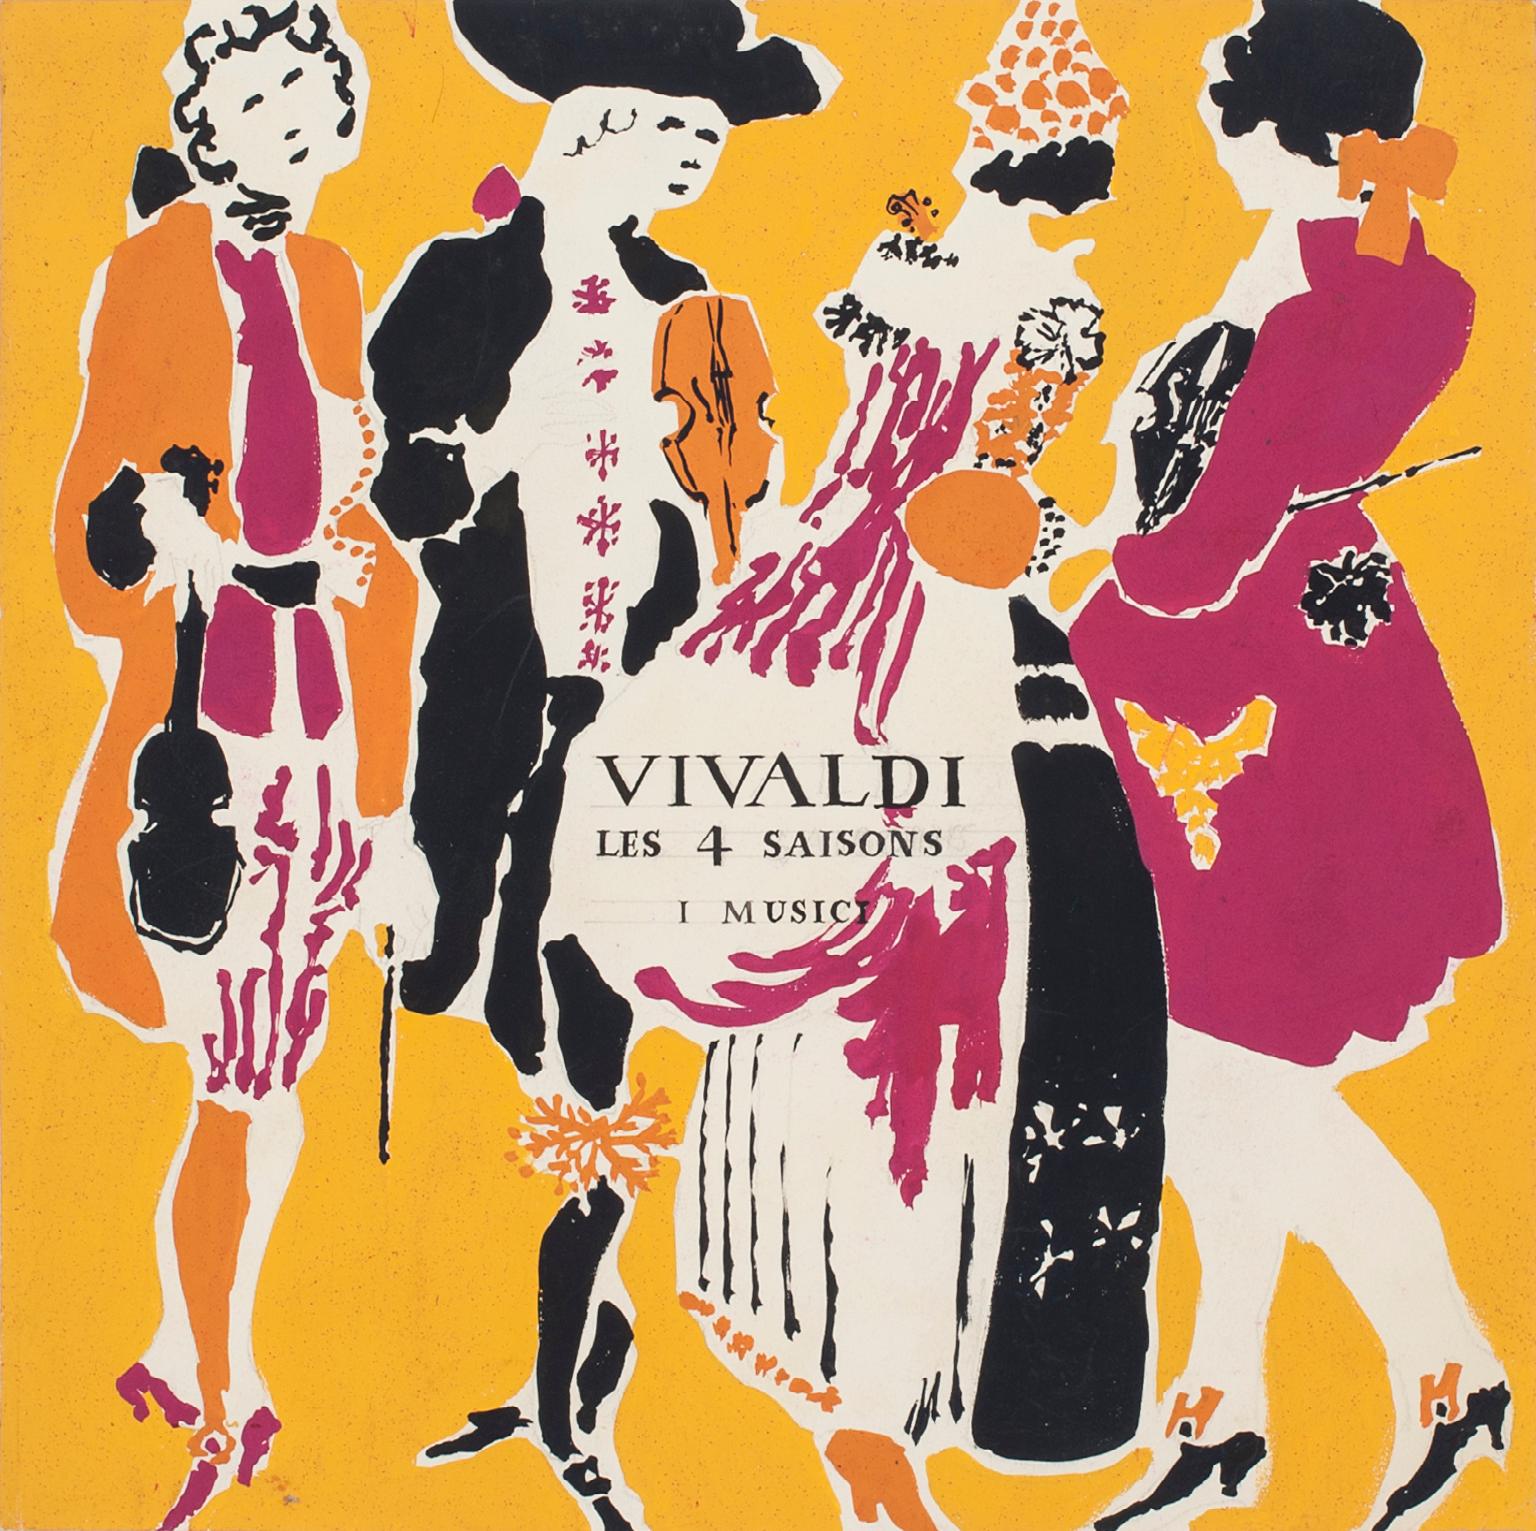 Unknown Figurative Print - Sketch for the album cover of Vivaldi - Lithograph on Paper - Mid 1900